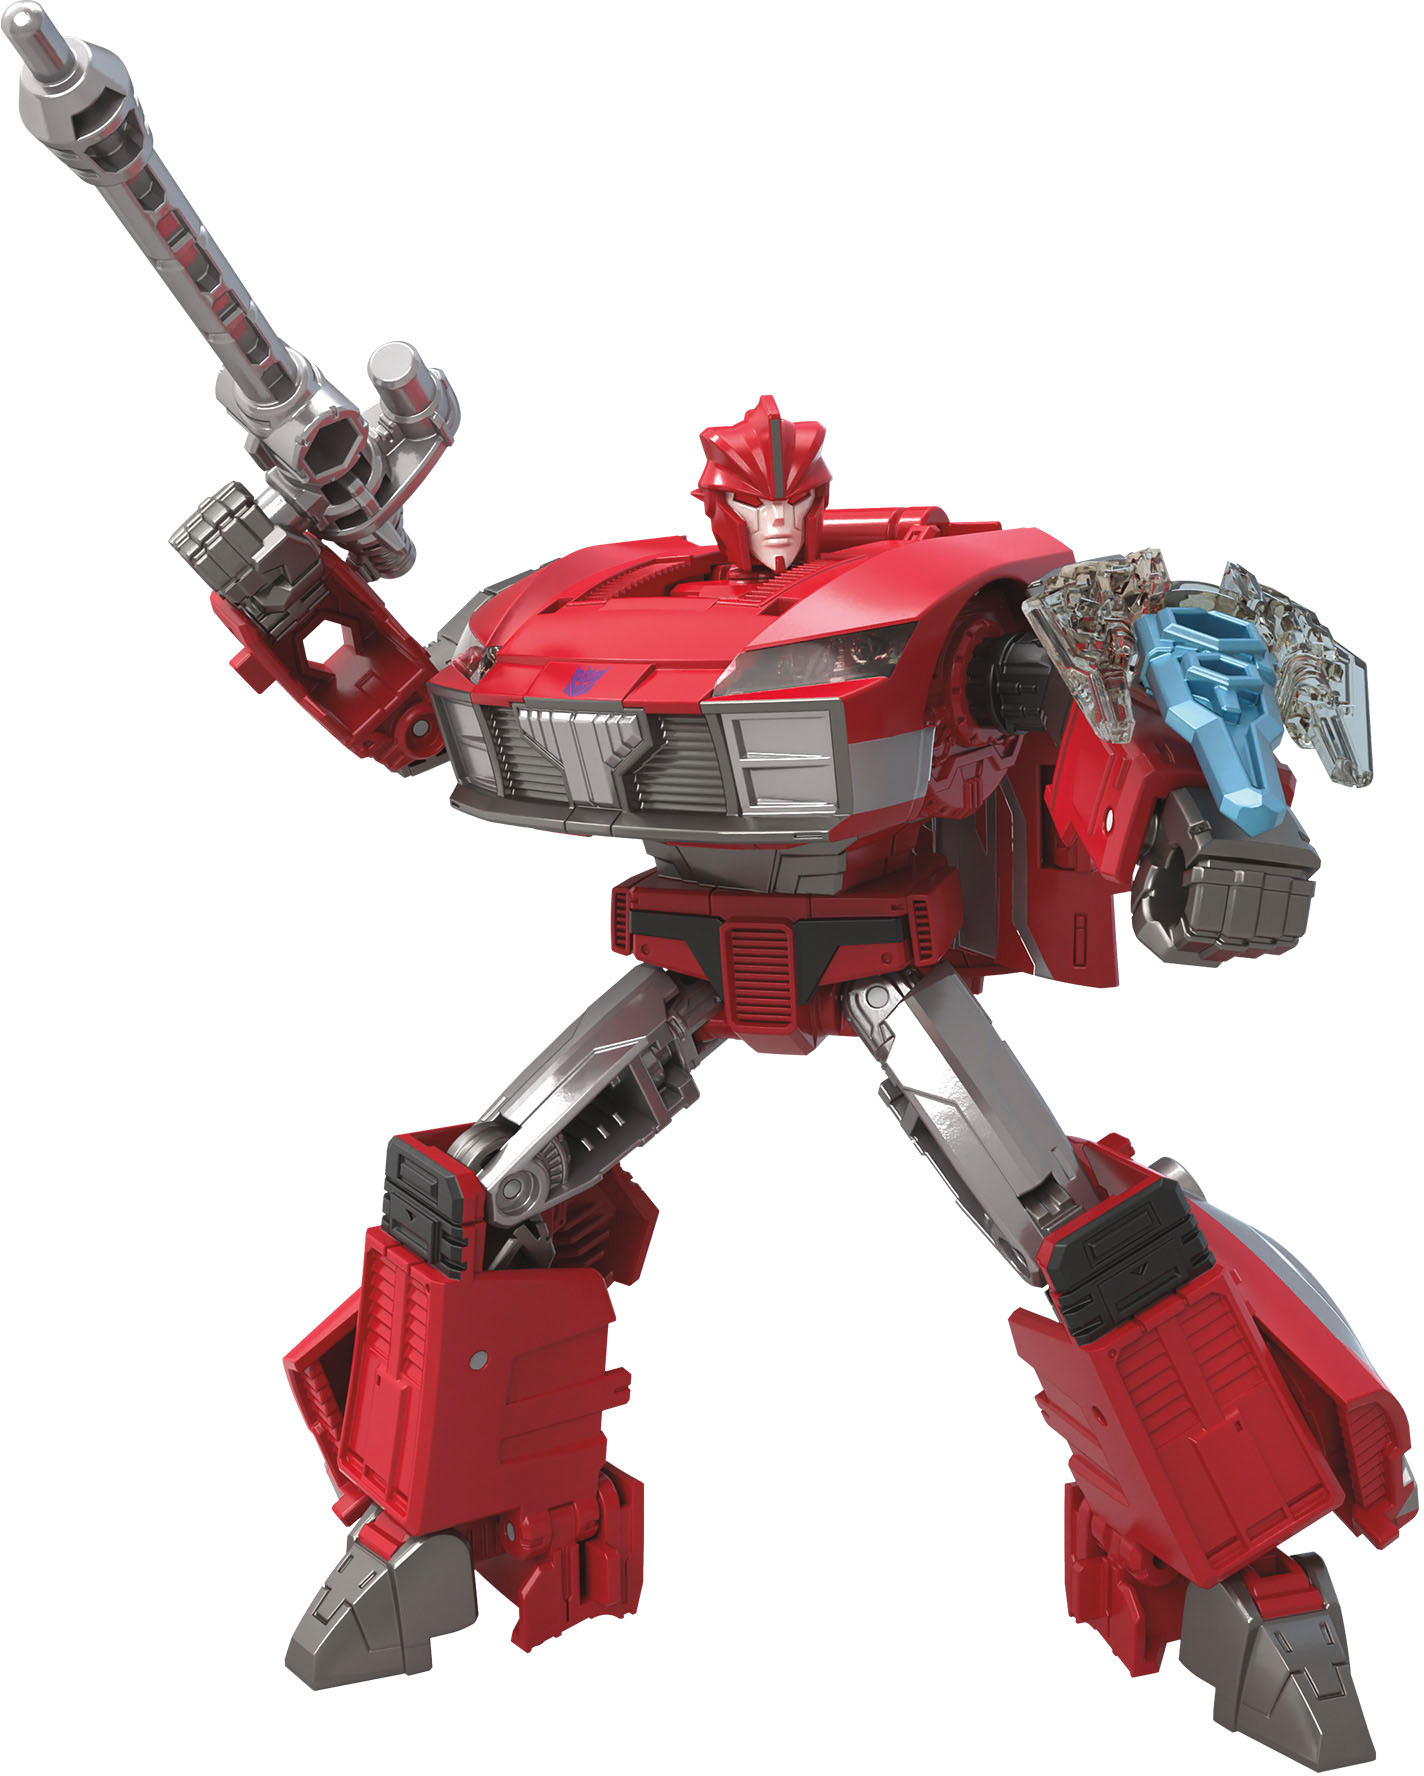 Angle View: Transformers - Generations War for Cybertron Deluxe WFC-E34 Trailbreaker